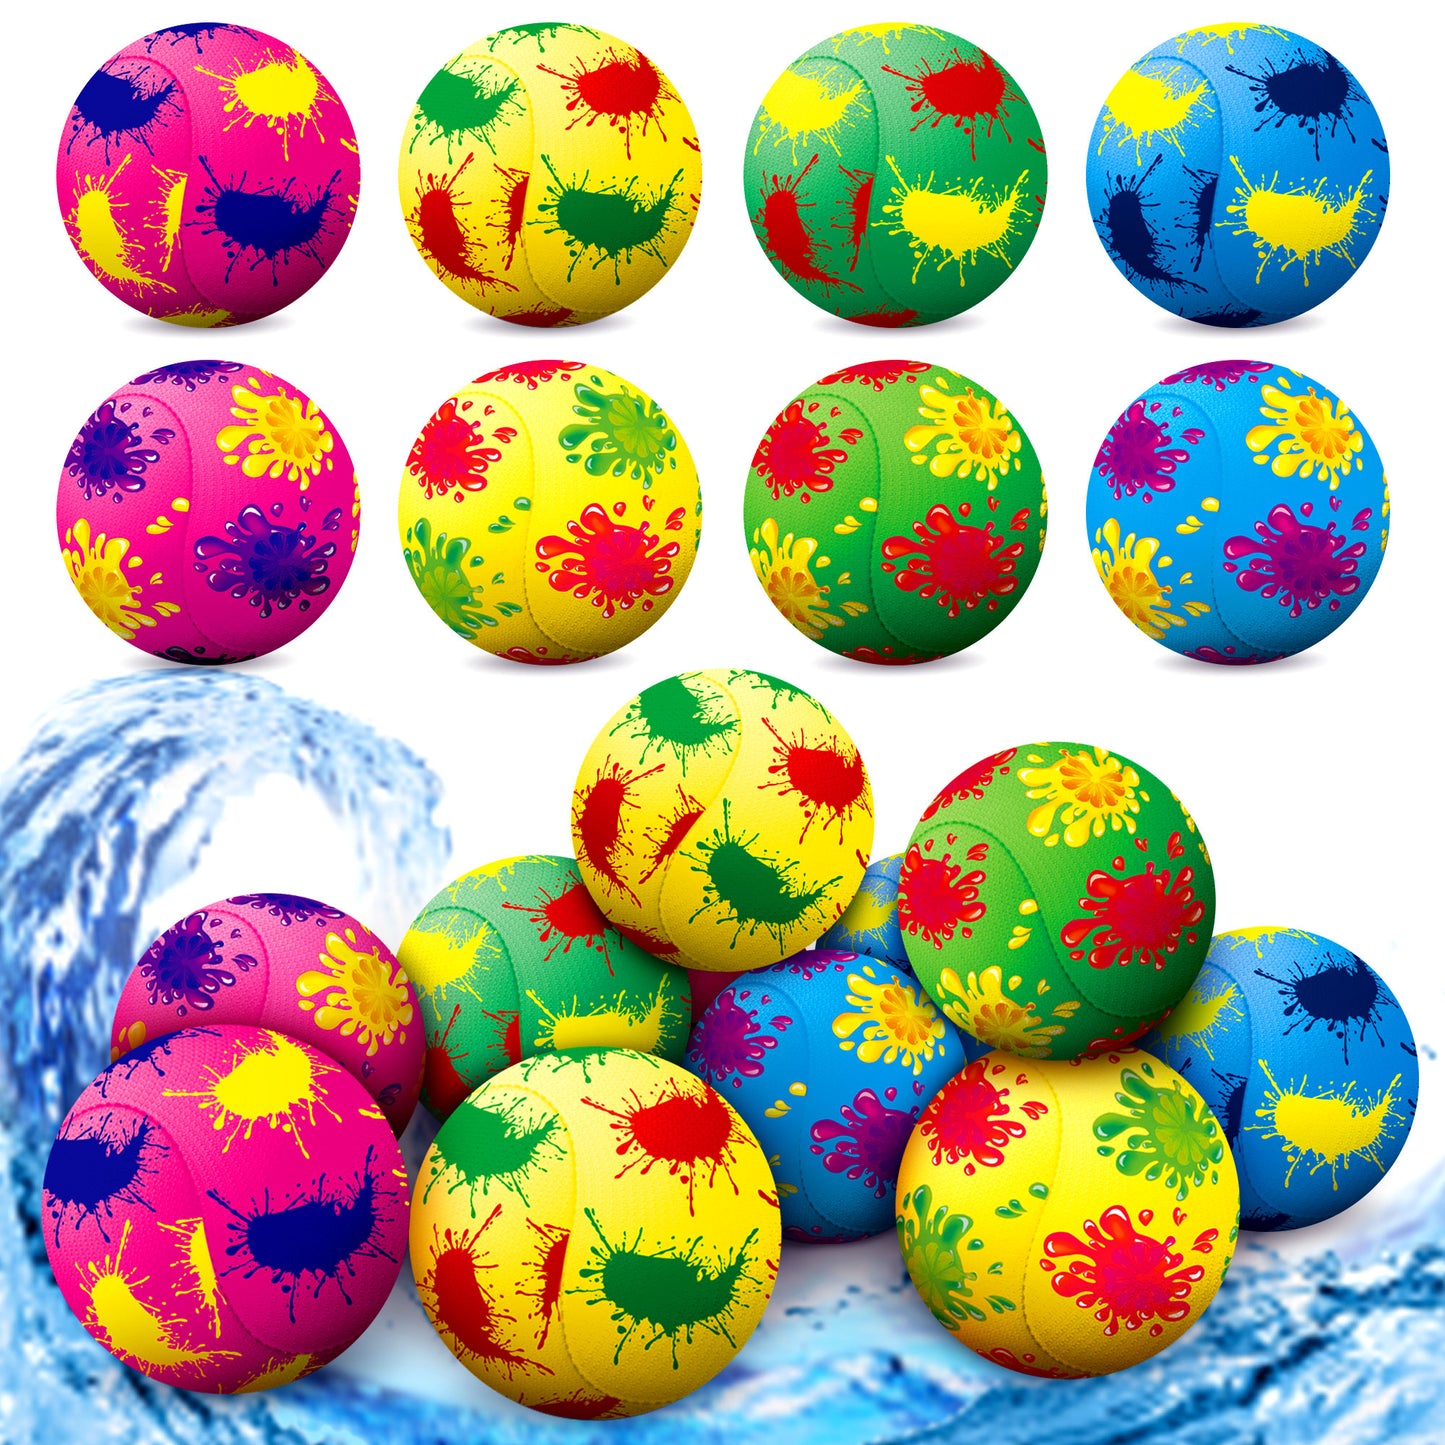 Reusable Water Balls, Reusable Water Balloons for Outdoor Toys and Games, Water Toys for Kids and Adults Boys and Girls - Summer Toys Ball for Pool and Backyard Fun